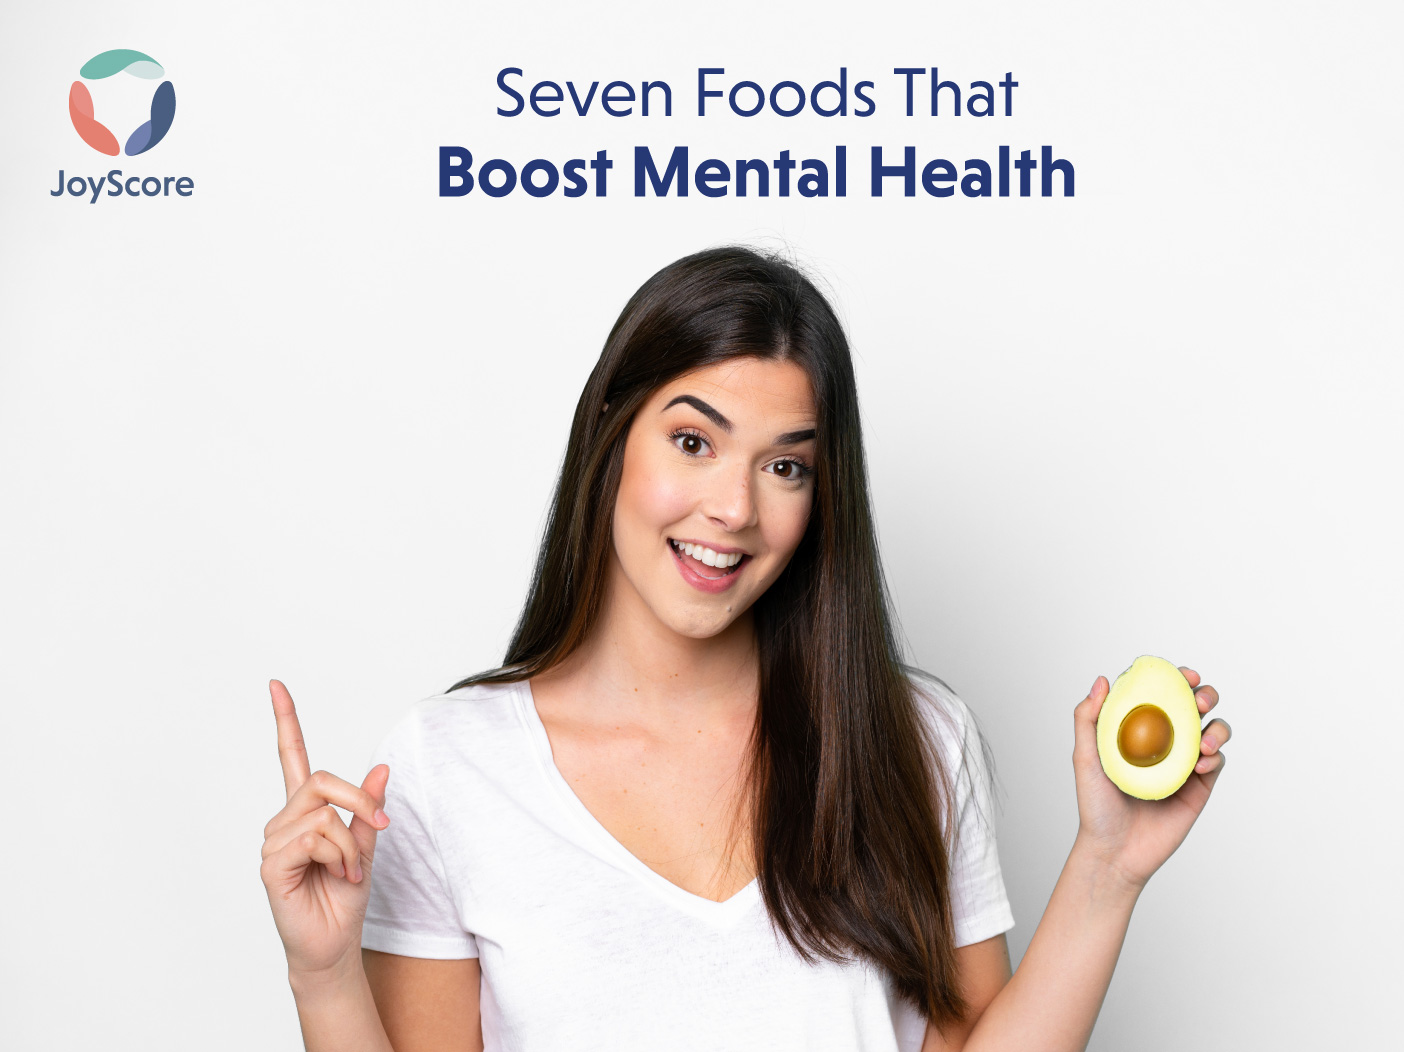 Seven Foods that Boost Mental Health